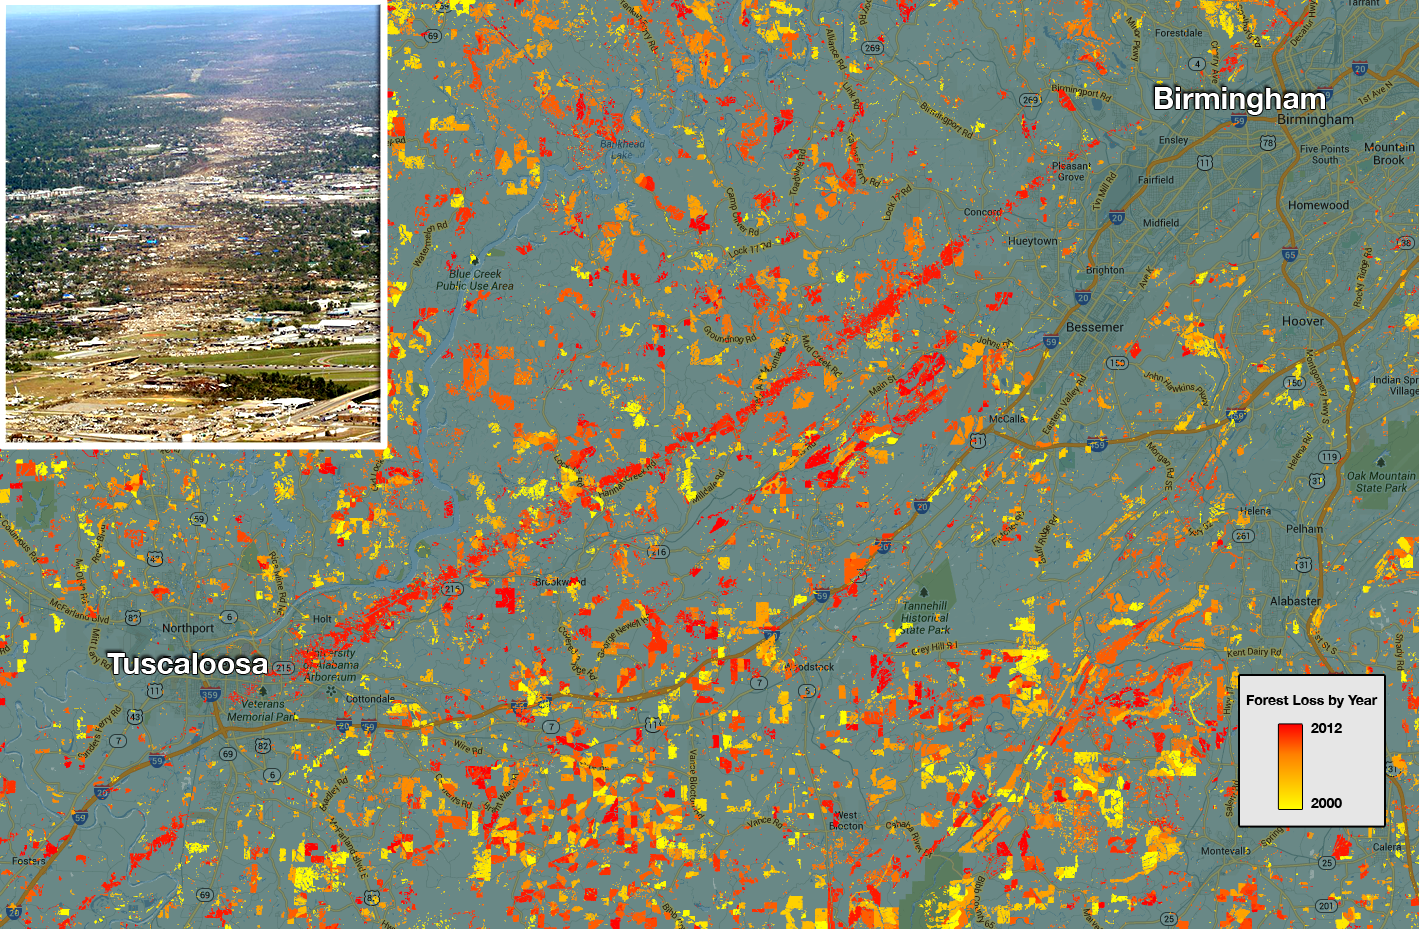 The forest cover maps also capture natural disturbances such as this 2011 tornado path in Alabama. In this map, the colors represent forest loss by year, with yellows representing loss closer to 2000 and reds representing later forest loss, up to 2012. Image Credit: NASA Goddard, based on data from Hansen et al., 2013.